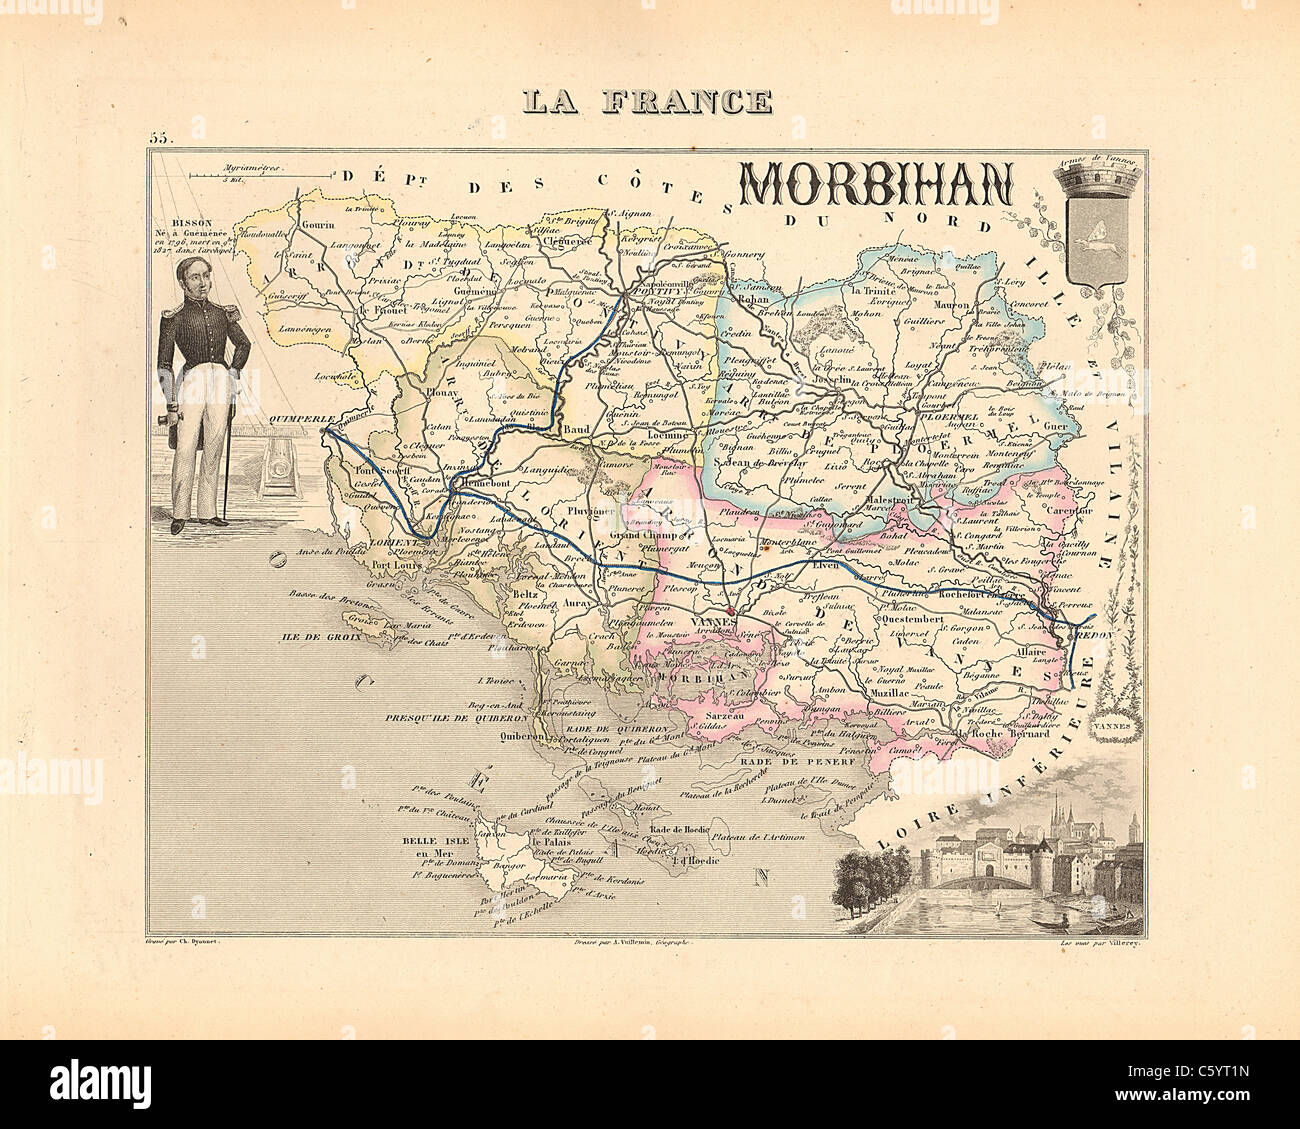 Morbihan Department -  Antiquarian Map from an 1858 French Atlas 'France and its Colonies' (La France et ses Colonies ) by Alexandre Vuillemin Stock Photo